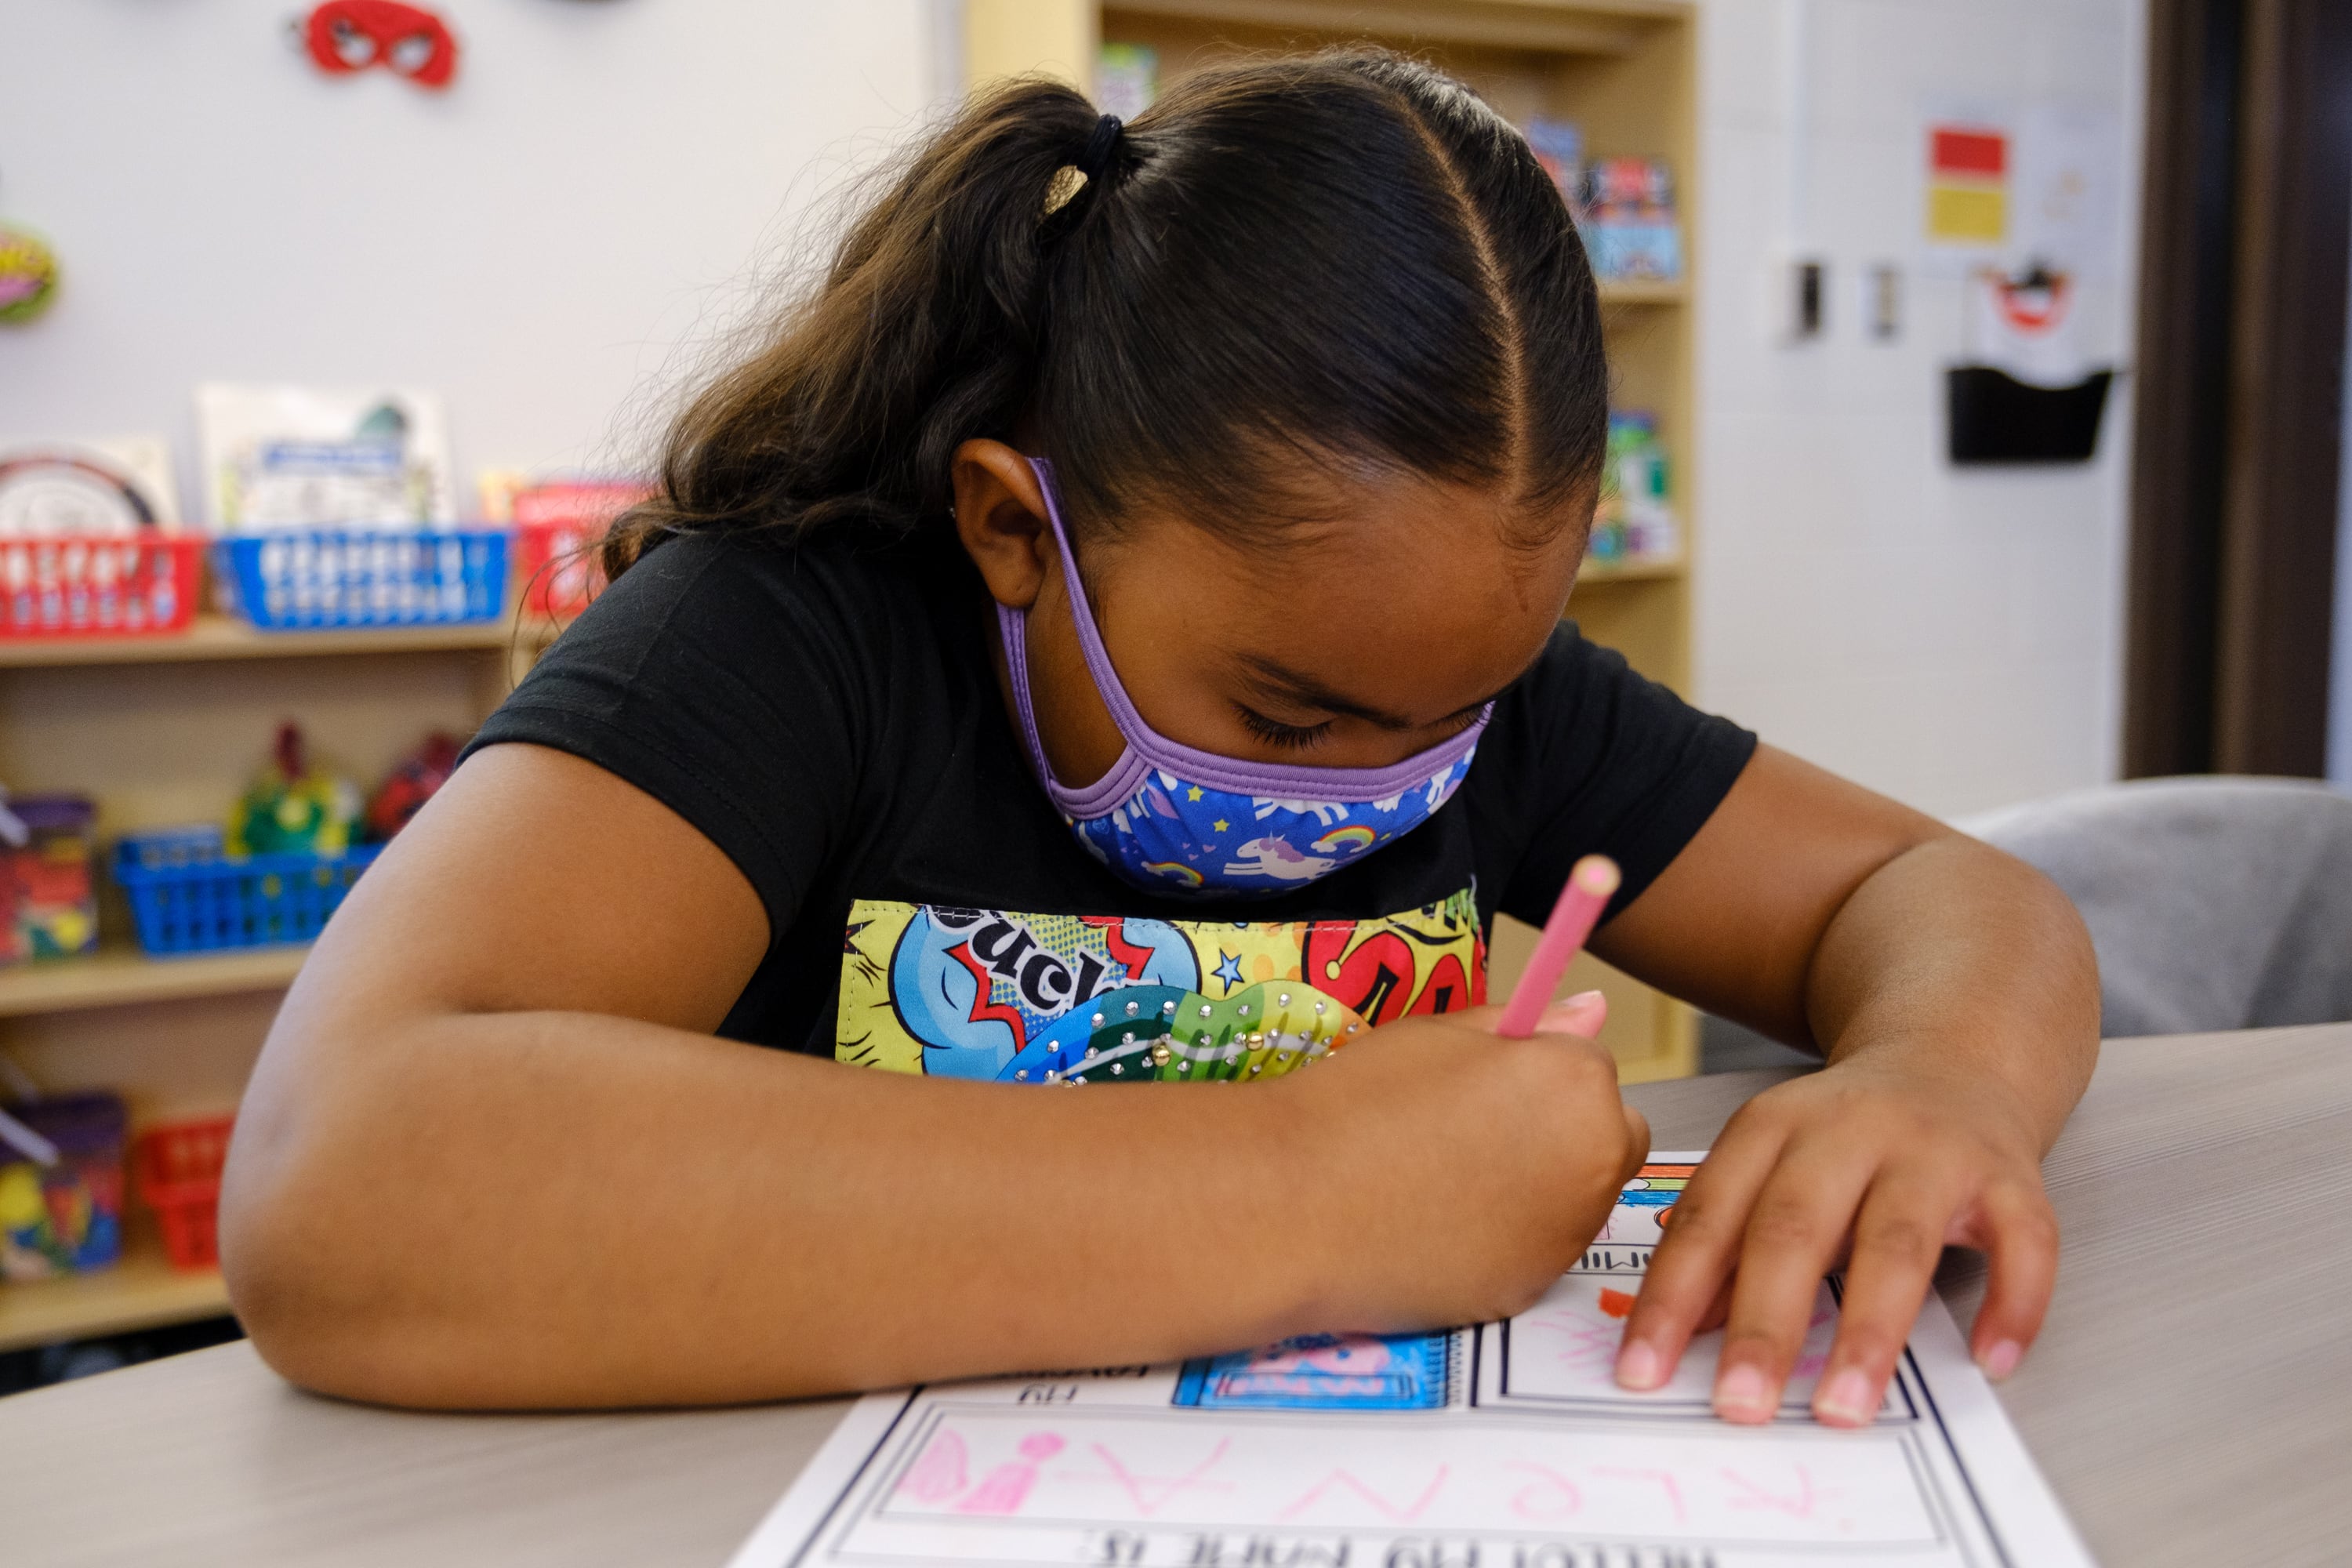 A young girl wearing a mask writes on a worksheet at her desk.